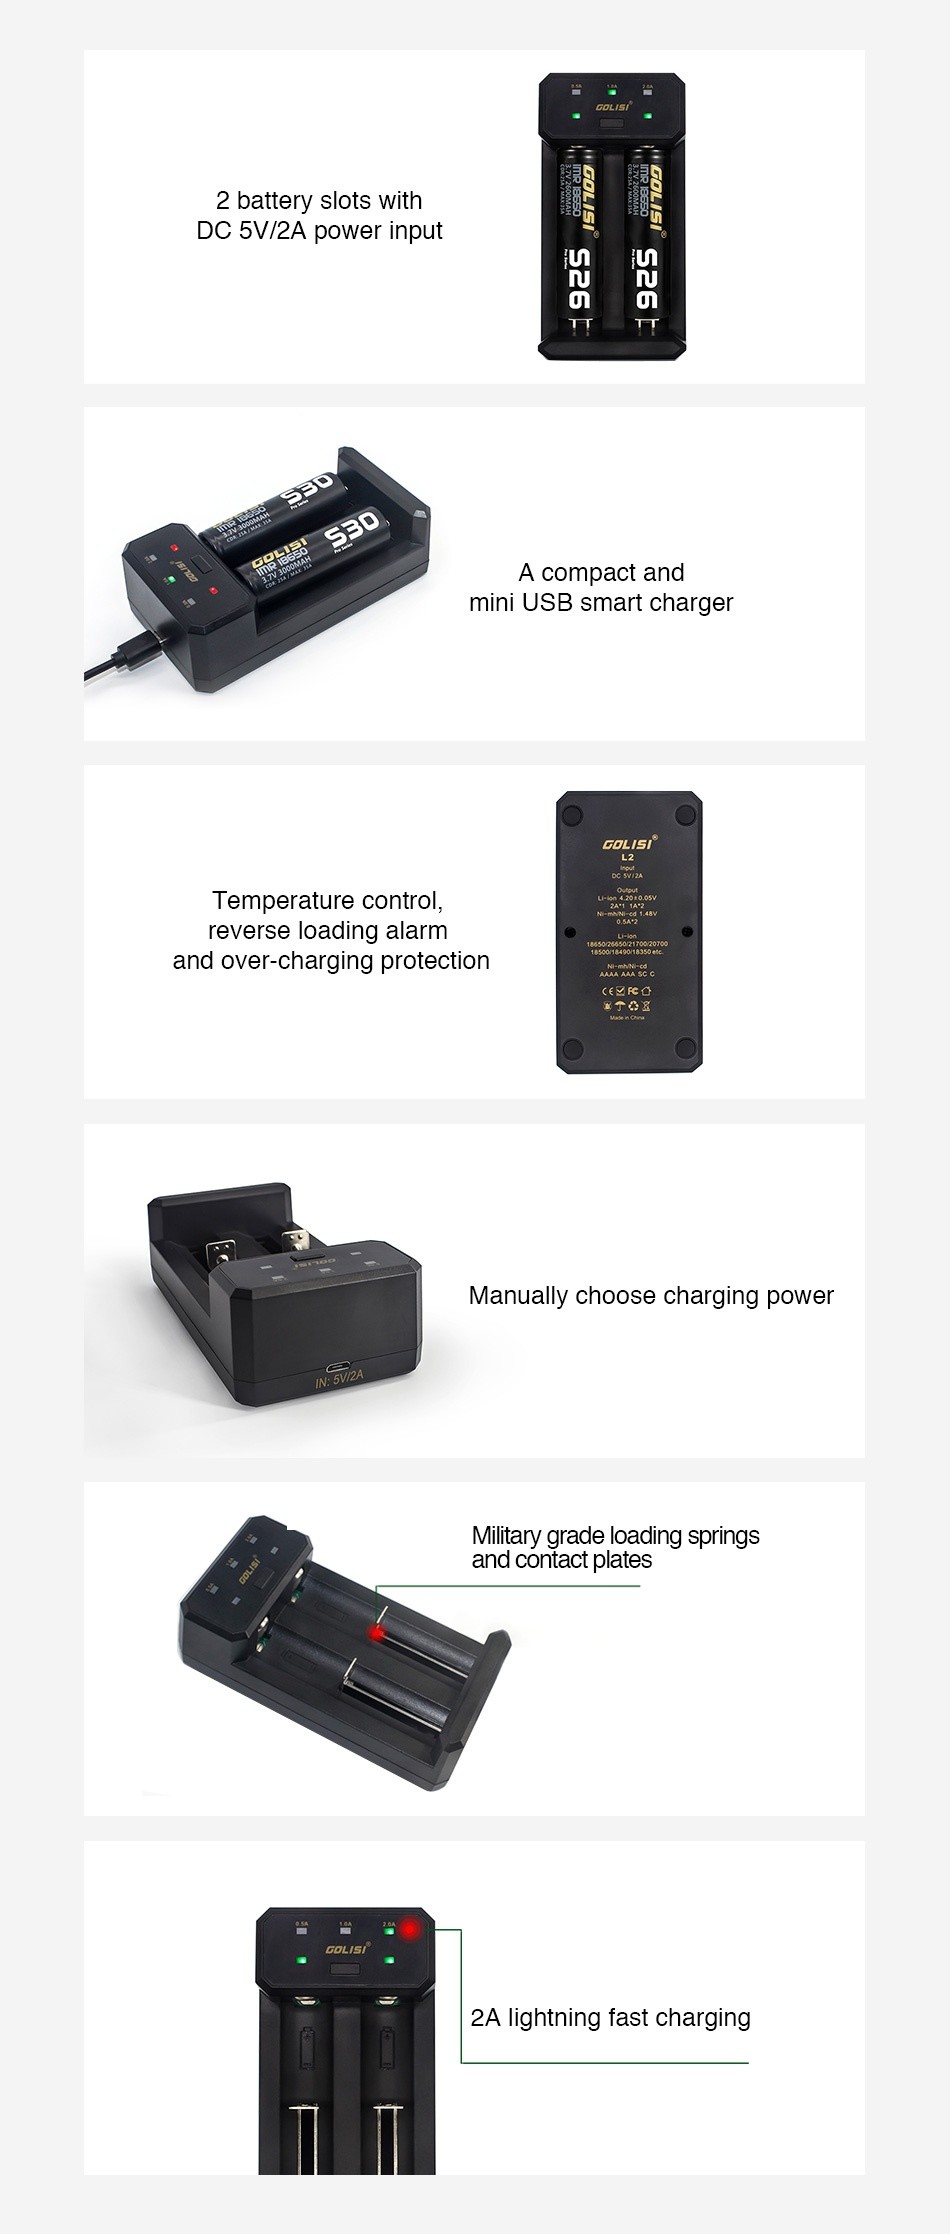 Golisi L2 2A Smart USB Charger with LCD Screen 2 battery slots with DC 5V 2A power input n h compact and mini USB smart charger BISI Temperature control reverse loading alarm and over charging protection Manually choose charging power Military grade loading springs and contact plates GOL S 2A lightning fast charging